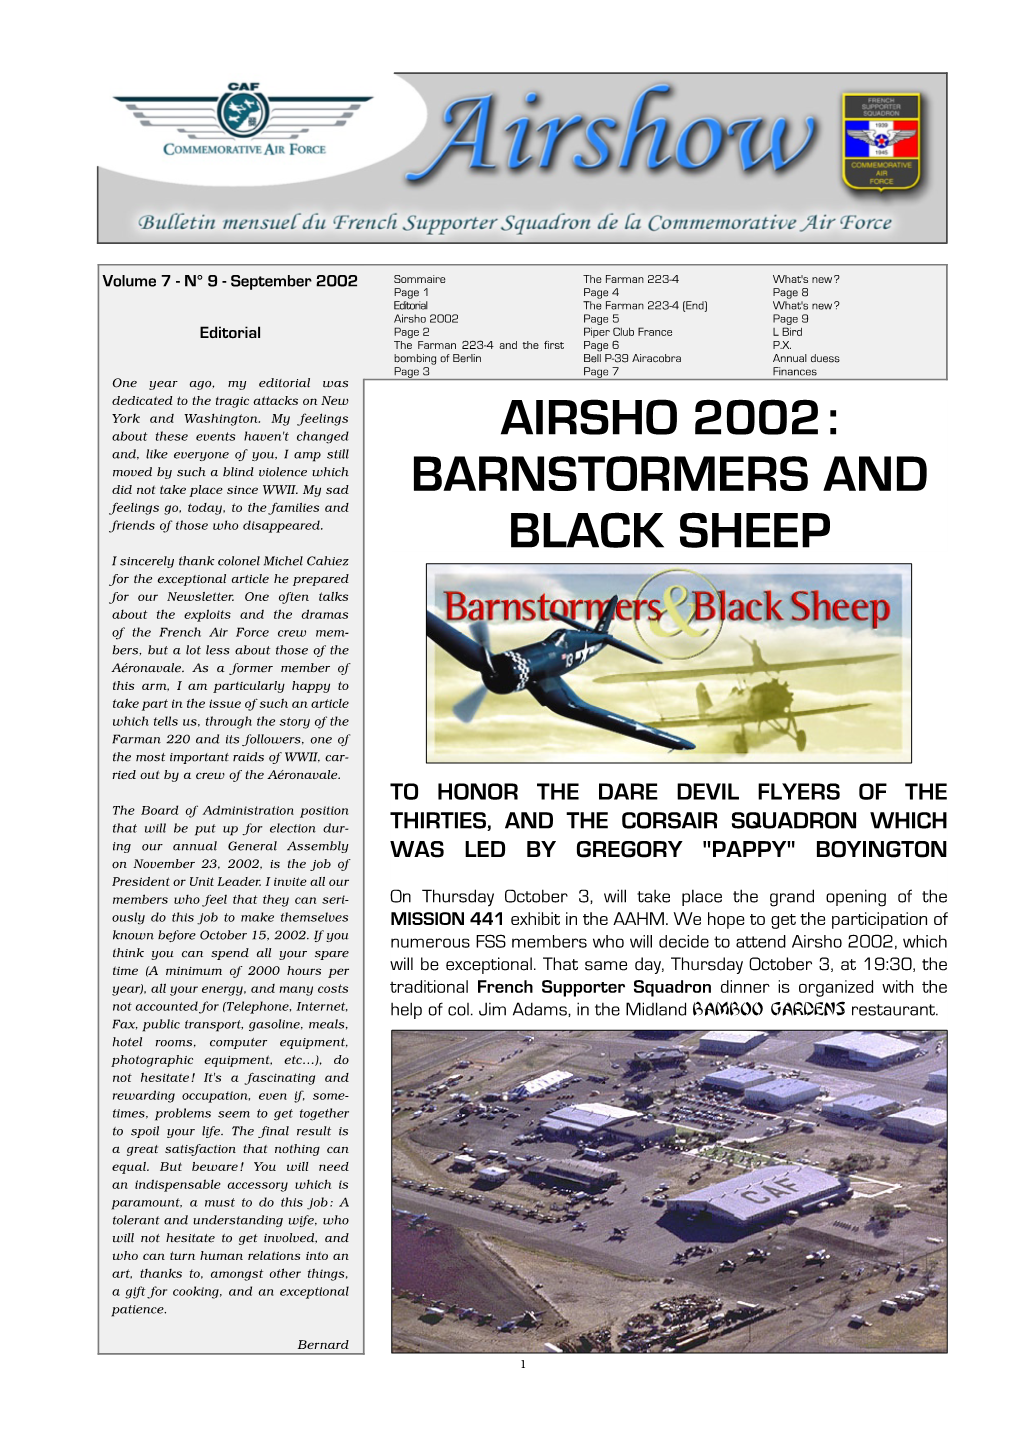 Airsho 2002 Page 5 Page 9 Editorial Page 2 Piper Club France L Bird the Farman 223-4 and the First Page 6 P.X